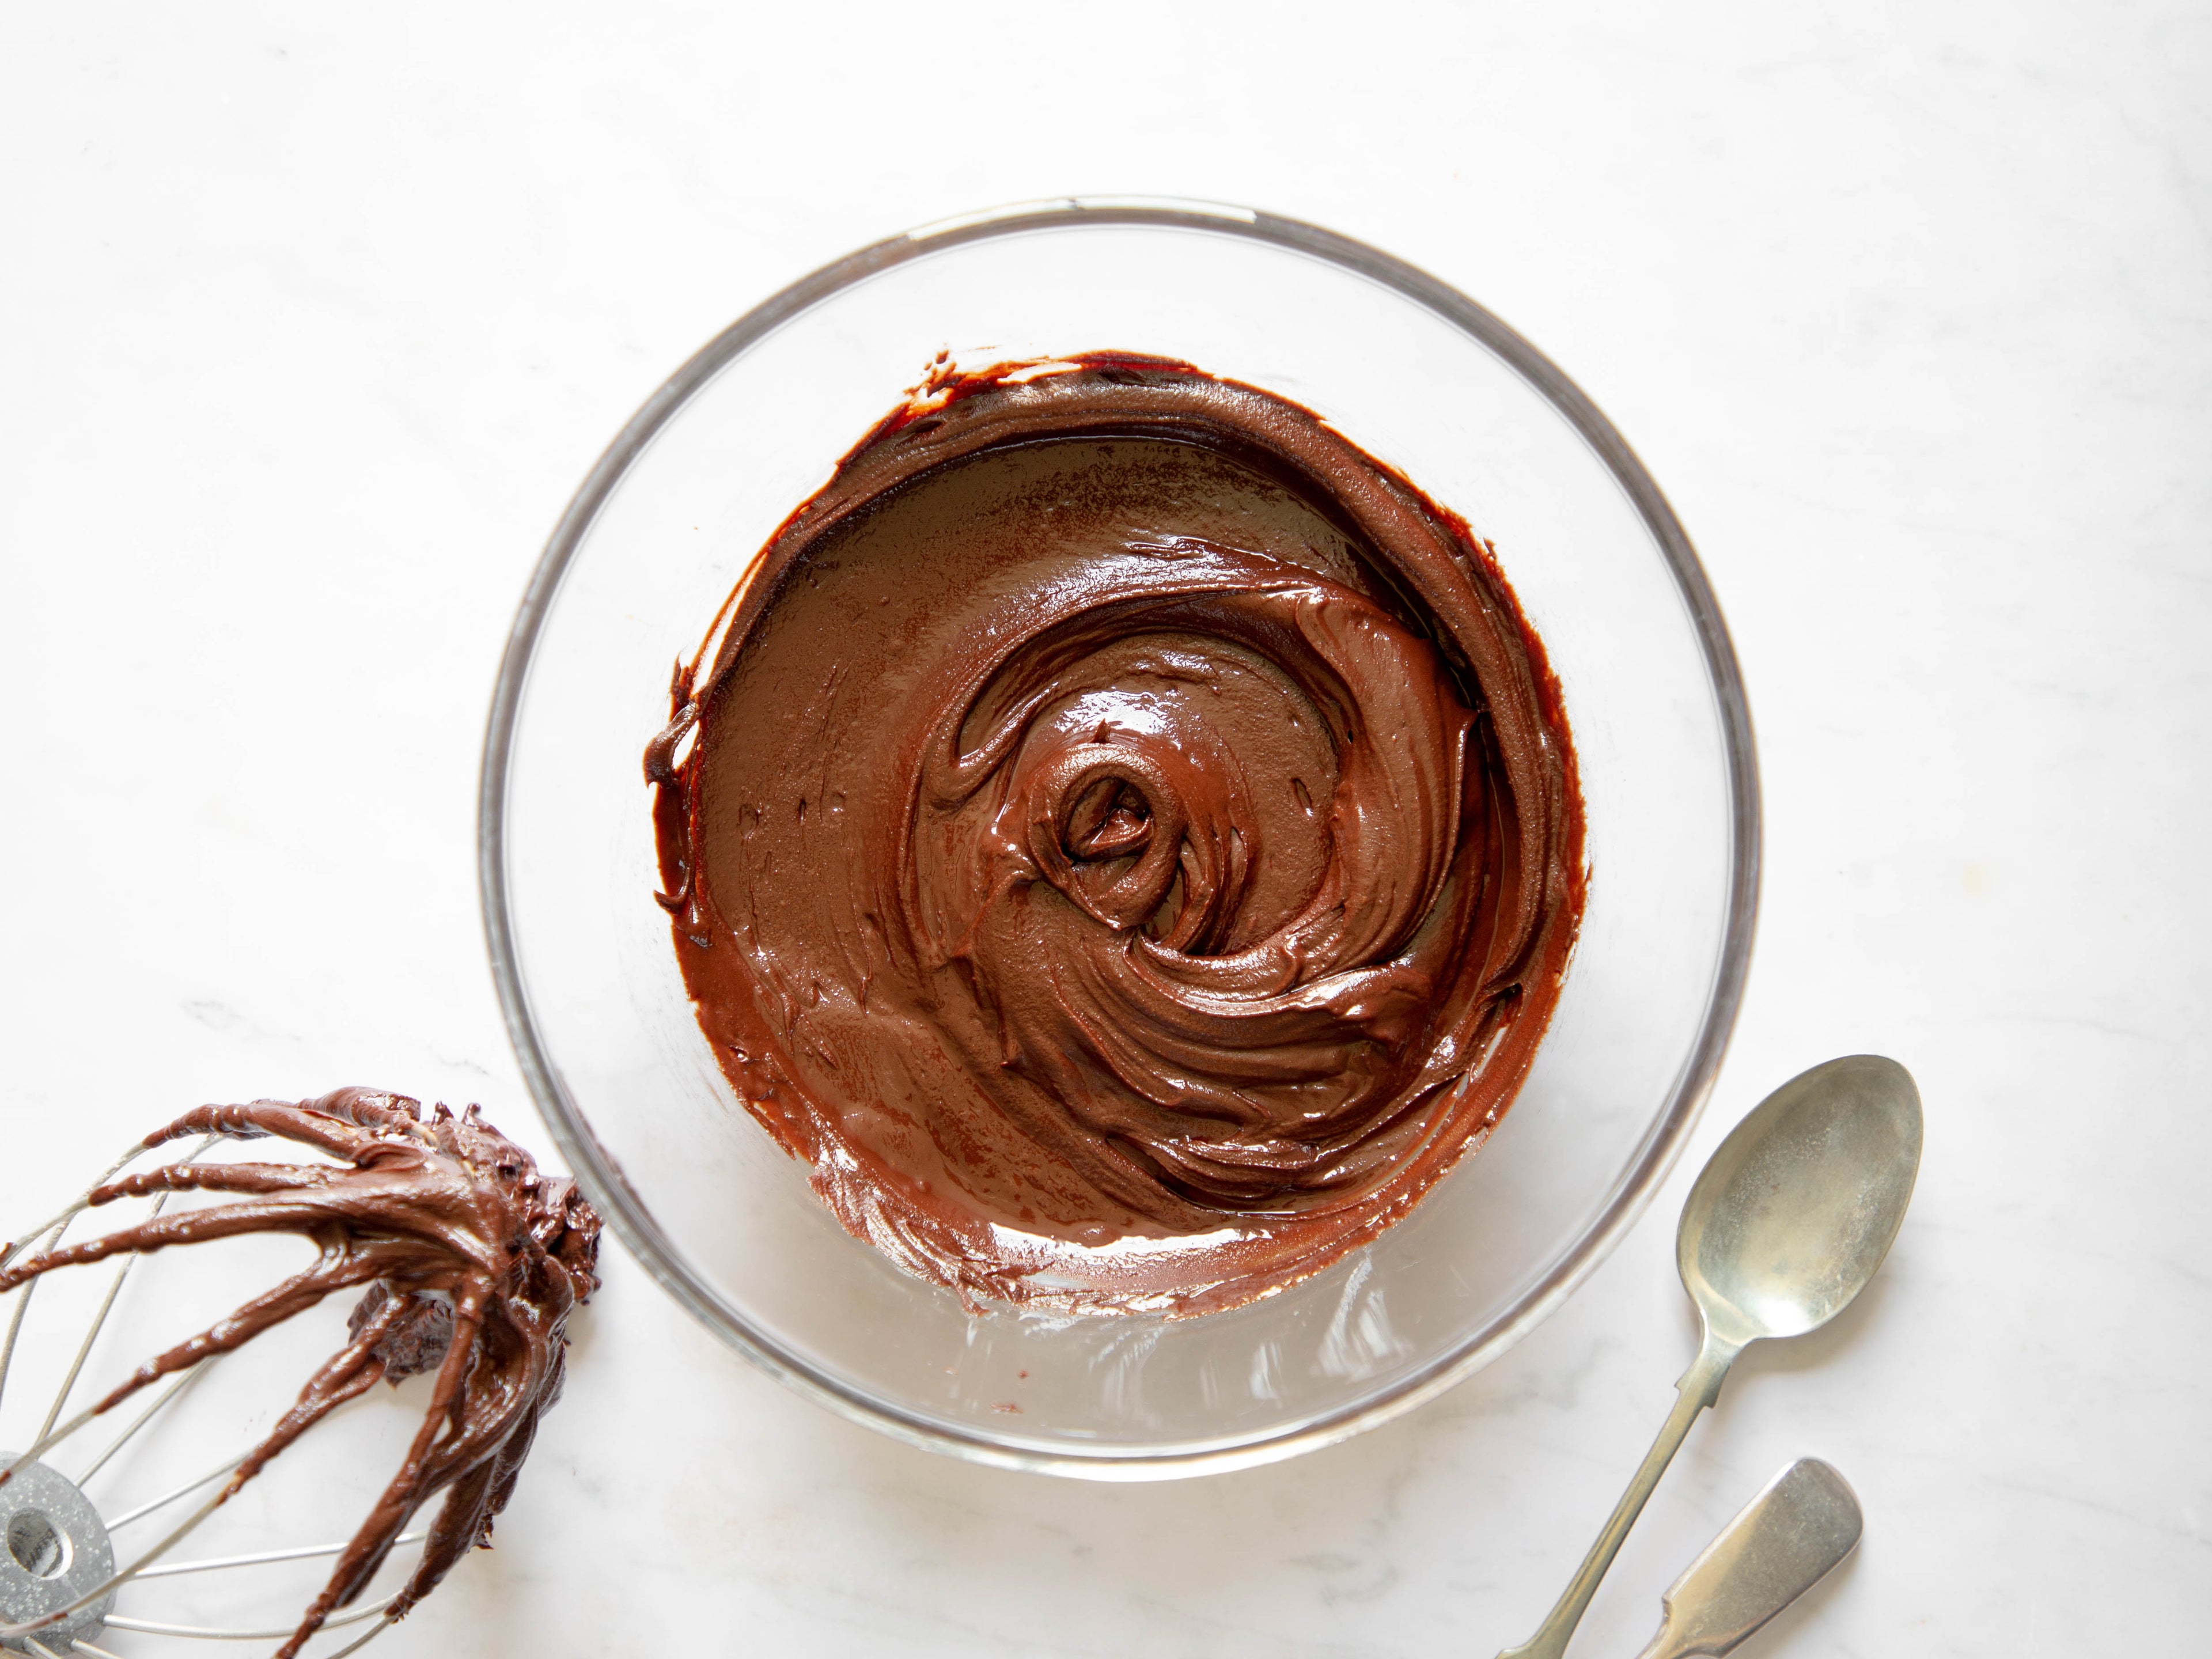 Glass Bowl of chocolate icing with a chocolate covered whisk on the side to the left and two spoons on the right